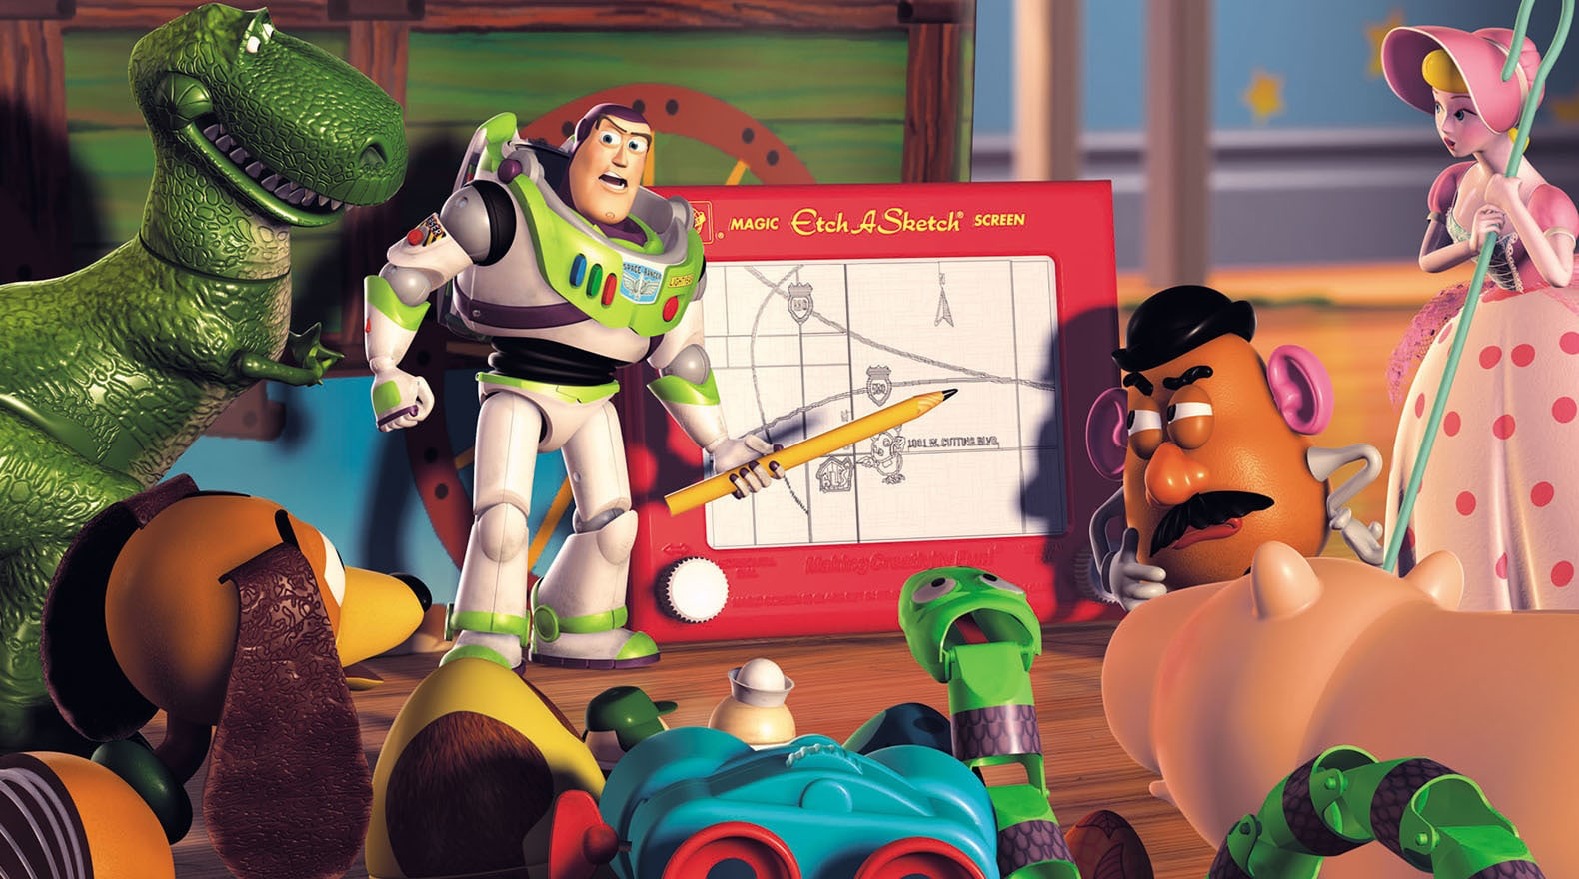 A still from Toy Story 2 - Buzz Lightyear addresses the other toys from in front of an Etch-a-Sketch he is using as a whiteboard.